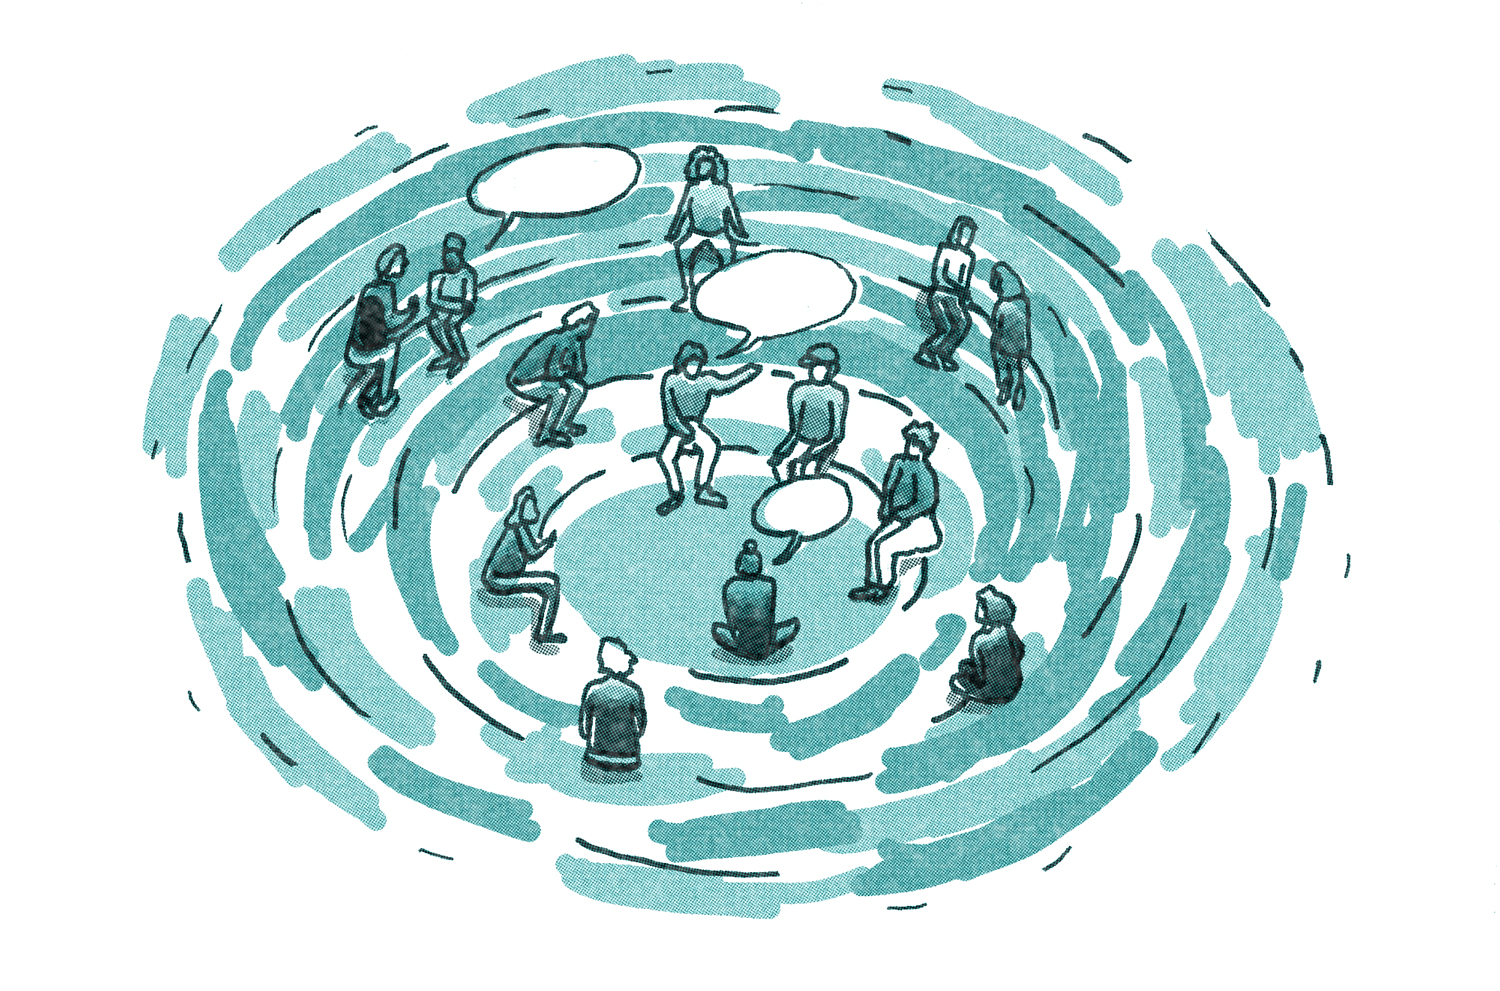 Illustration of a group of people seated in a circular formation. They are engaging in a discussion, with speech bubbles above their heads, depicted in various shades of teal, giving the impression of a collaborative or community meeting.